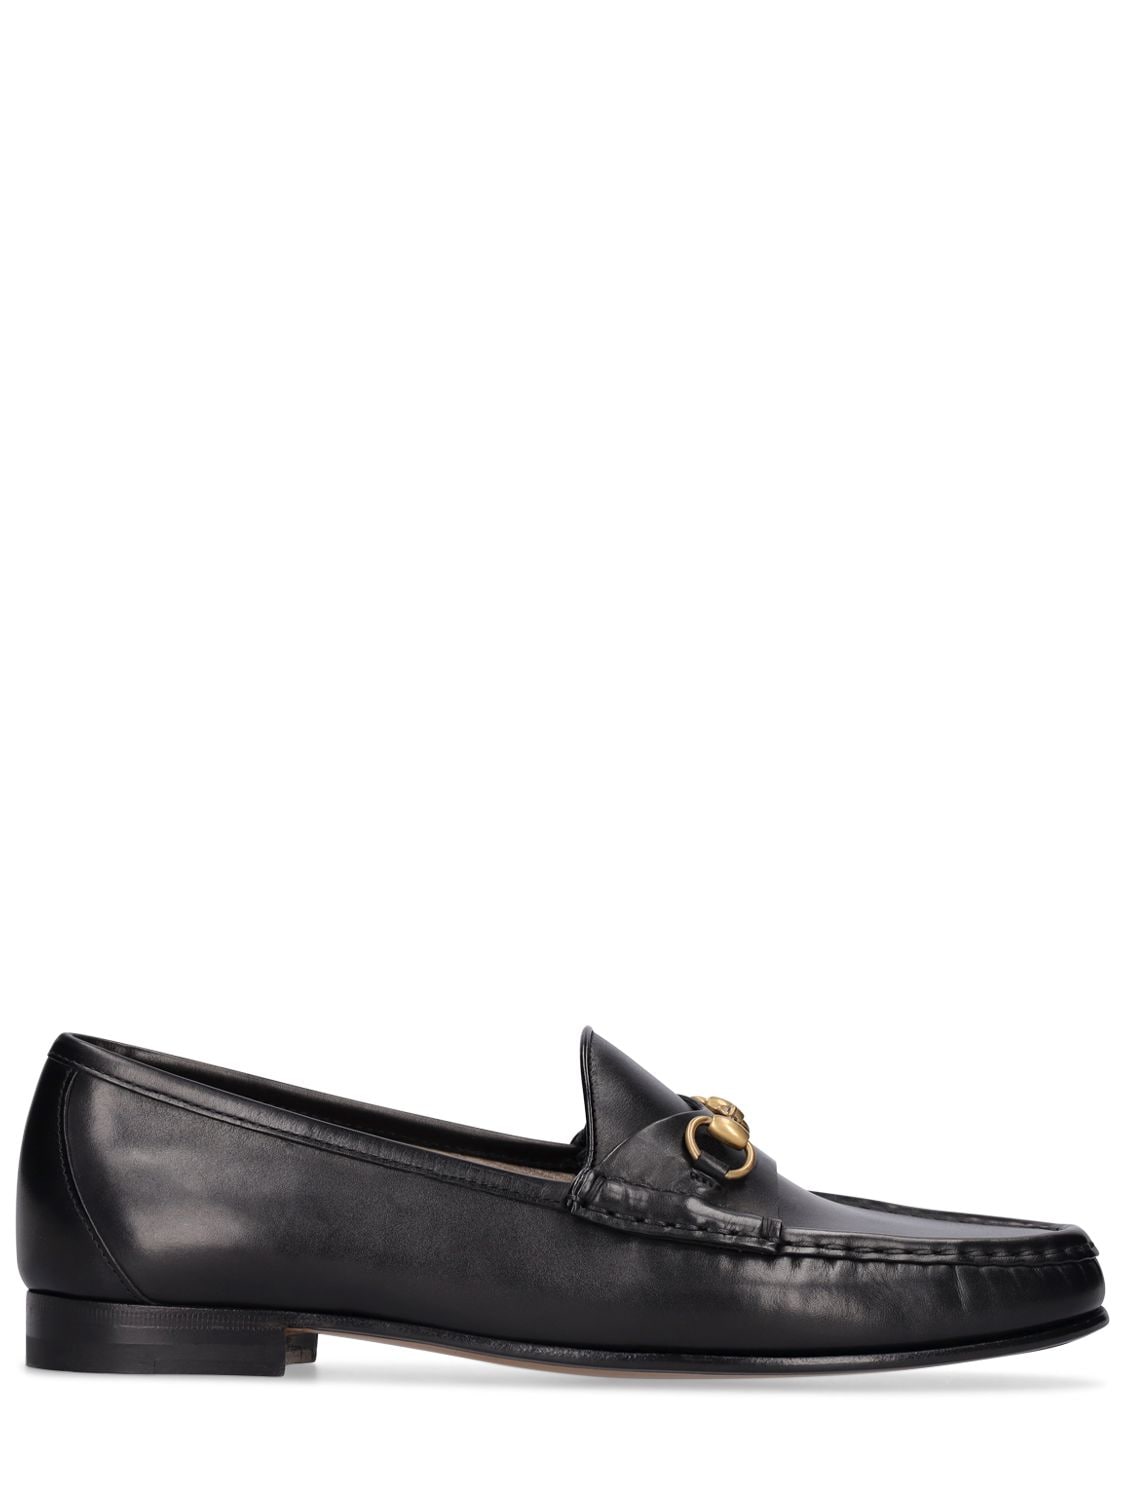 GUCCI 20mm 1953 Leather Loafers